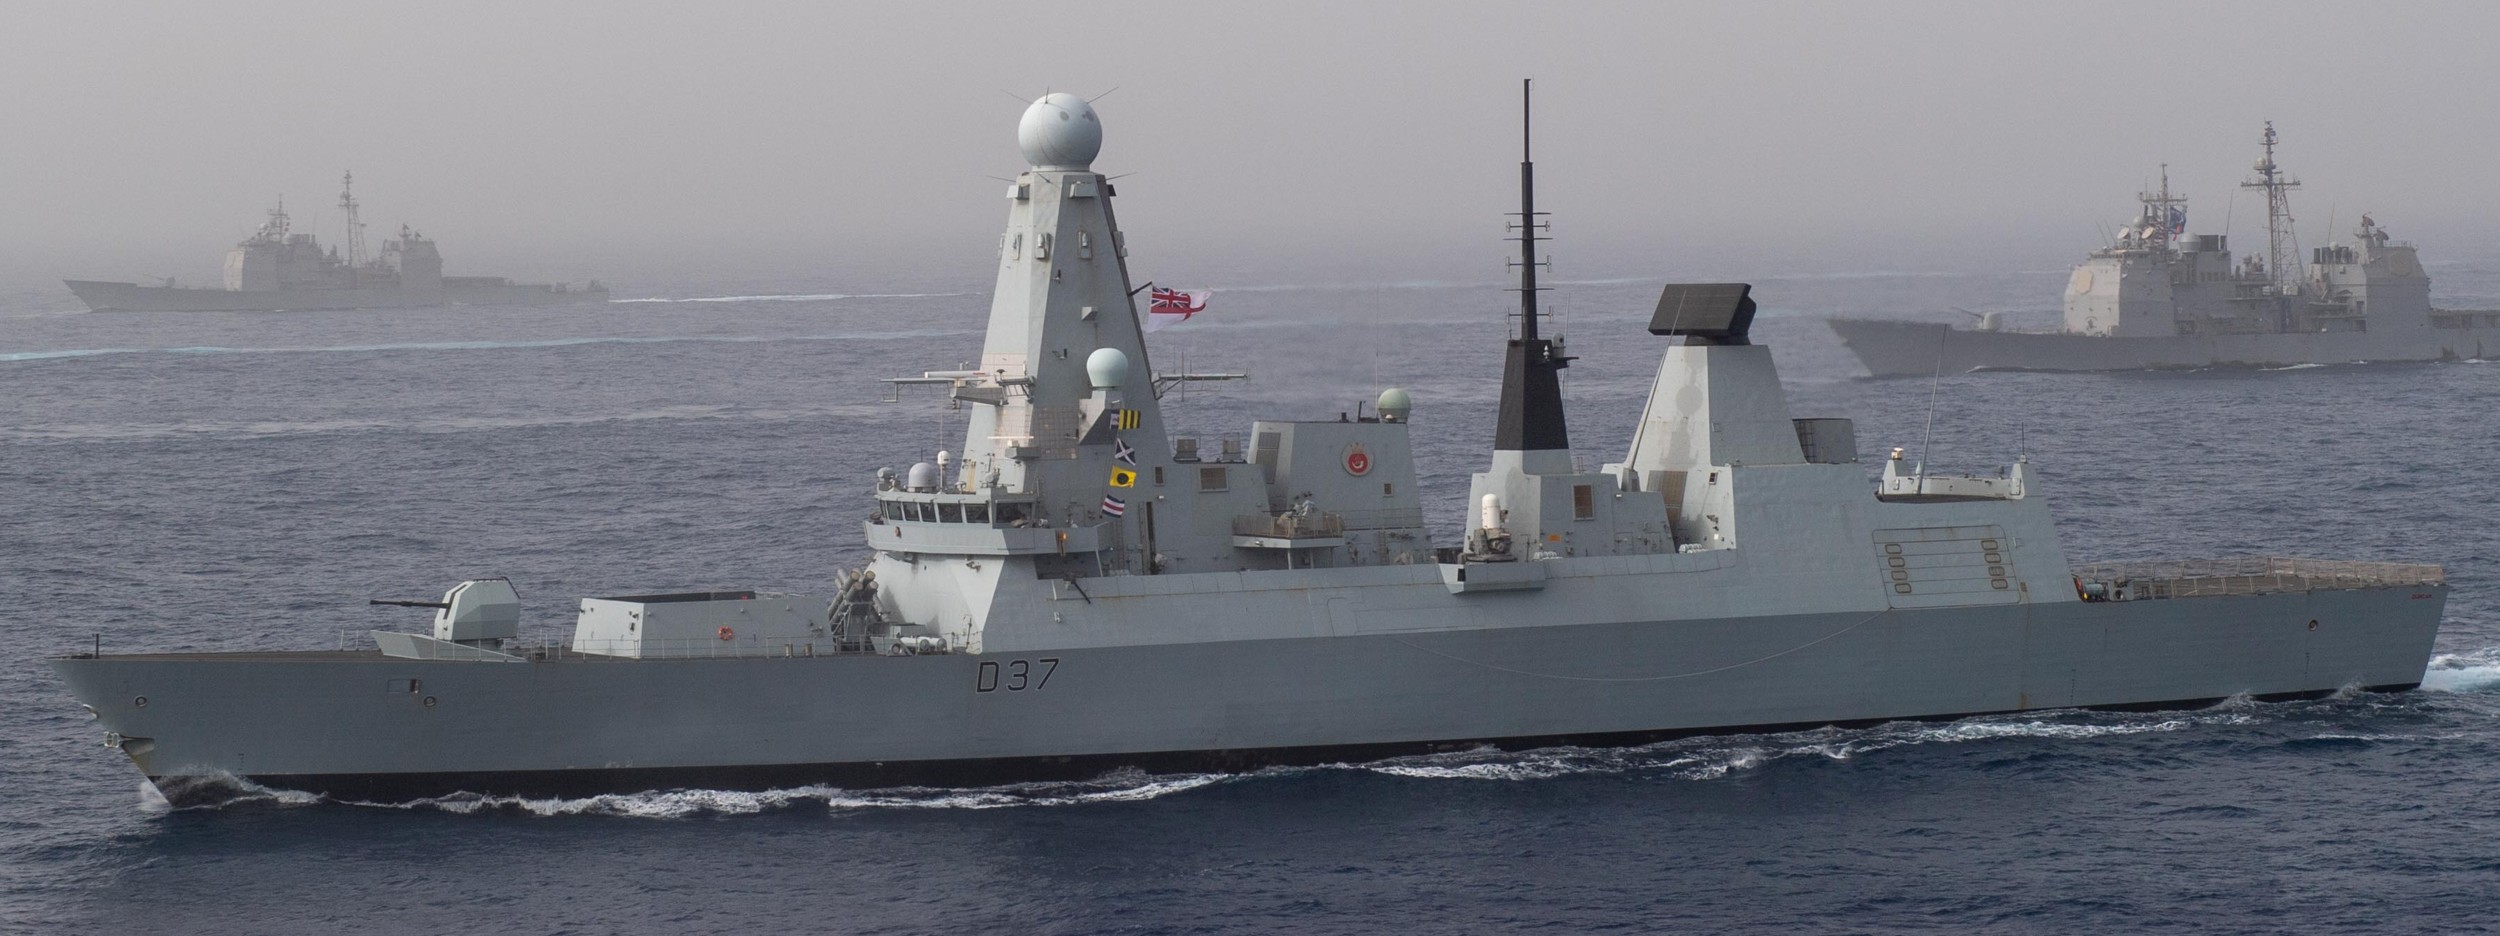 d37 hms duncan d-37 type 45 daring class guided missile destroyer ddg royal navy sea viper 29